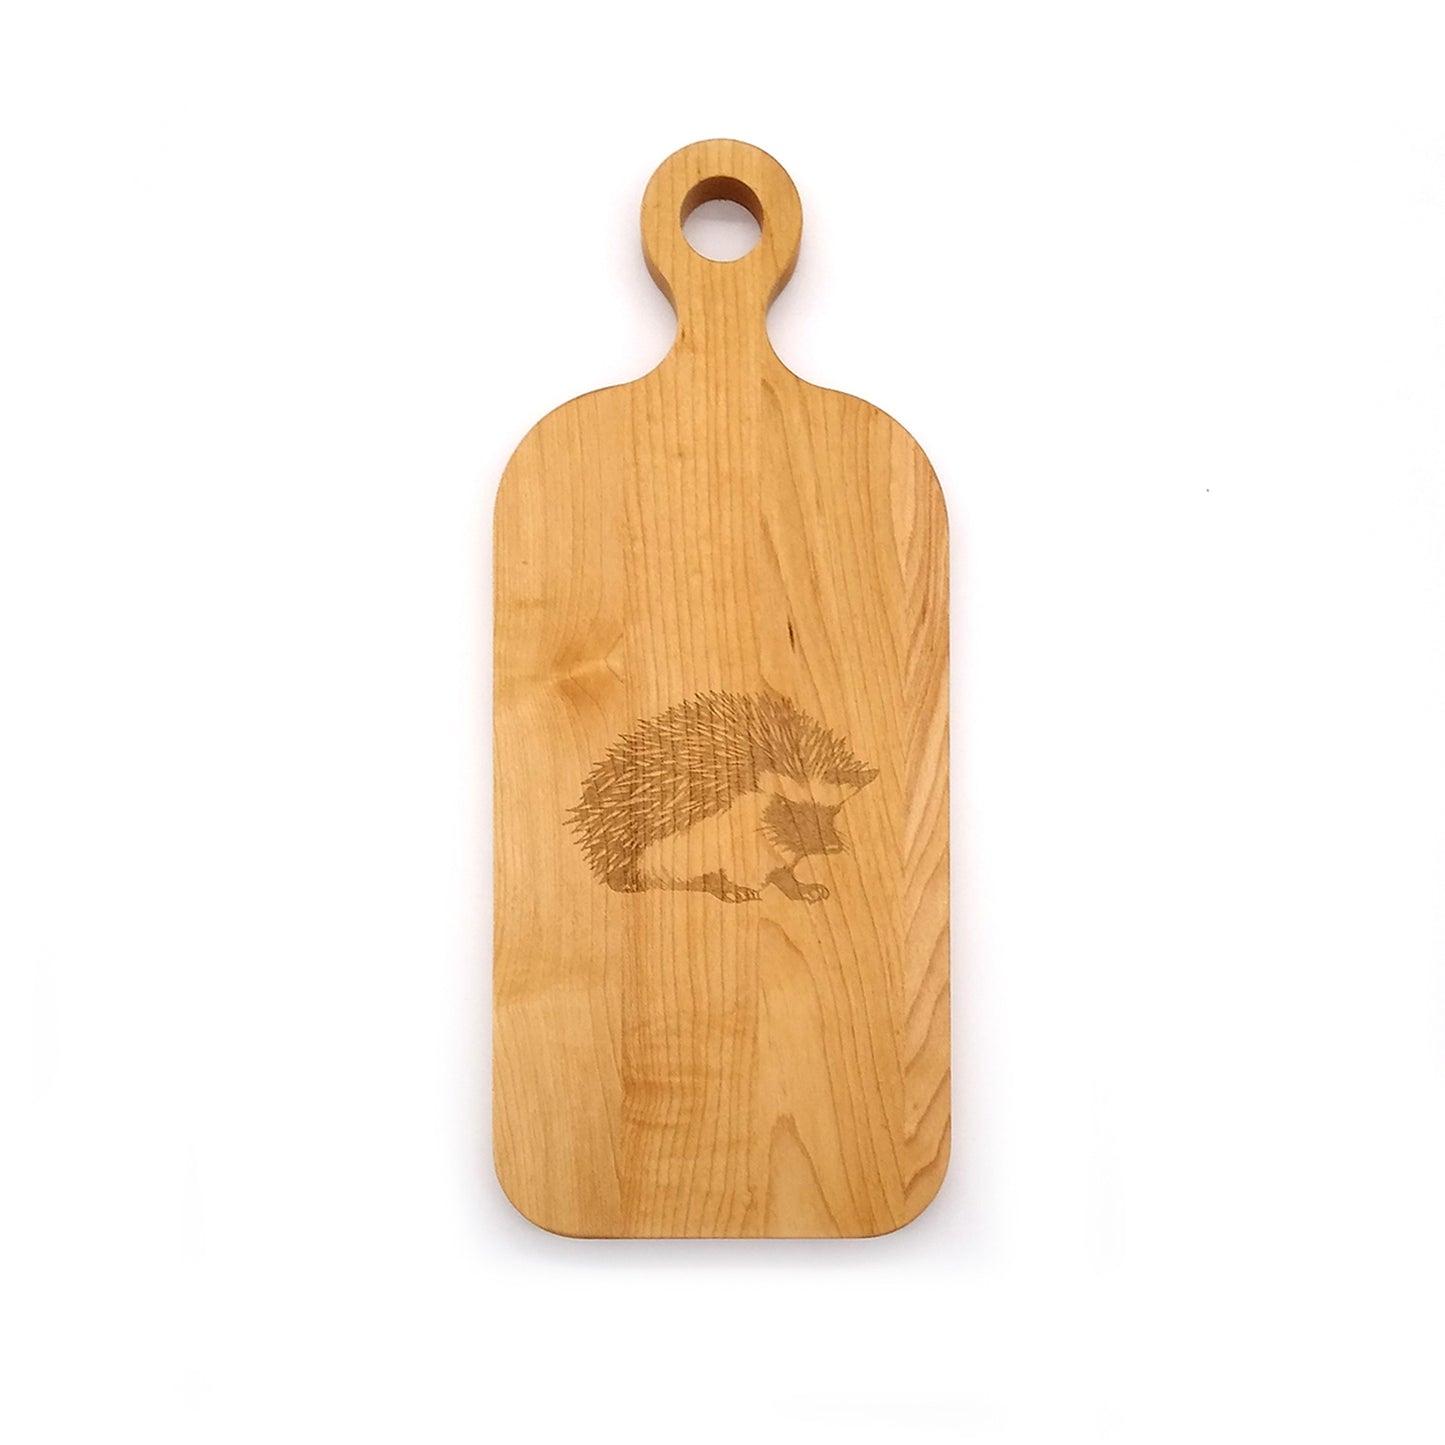 Laura Zindel Small Maple Paddle Serving Board - More designs available